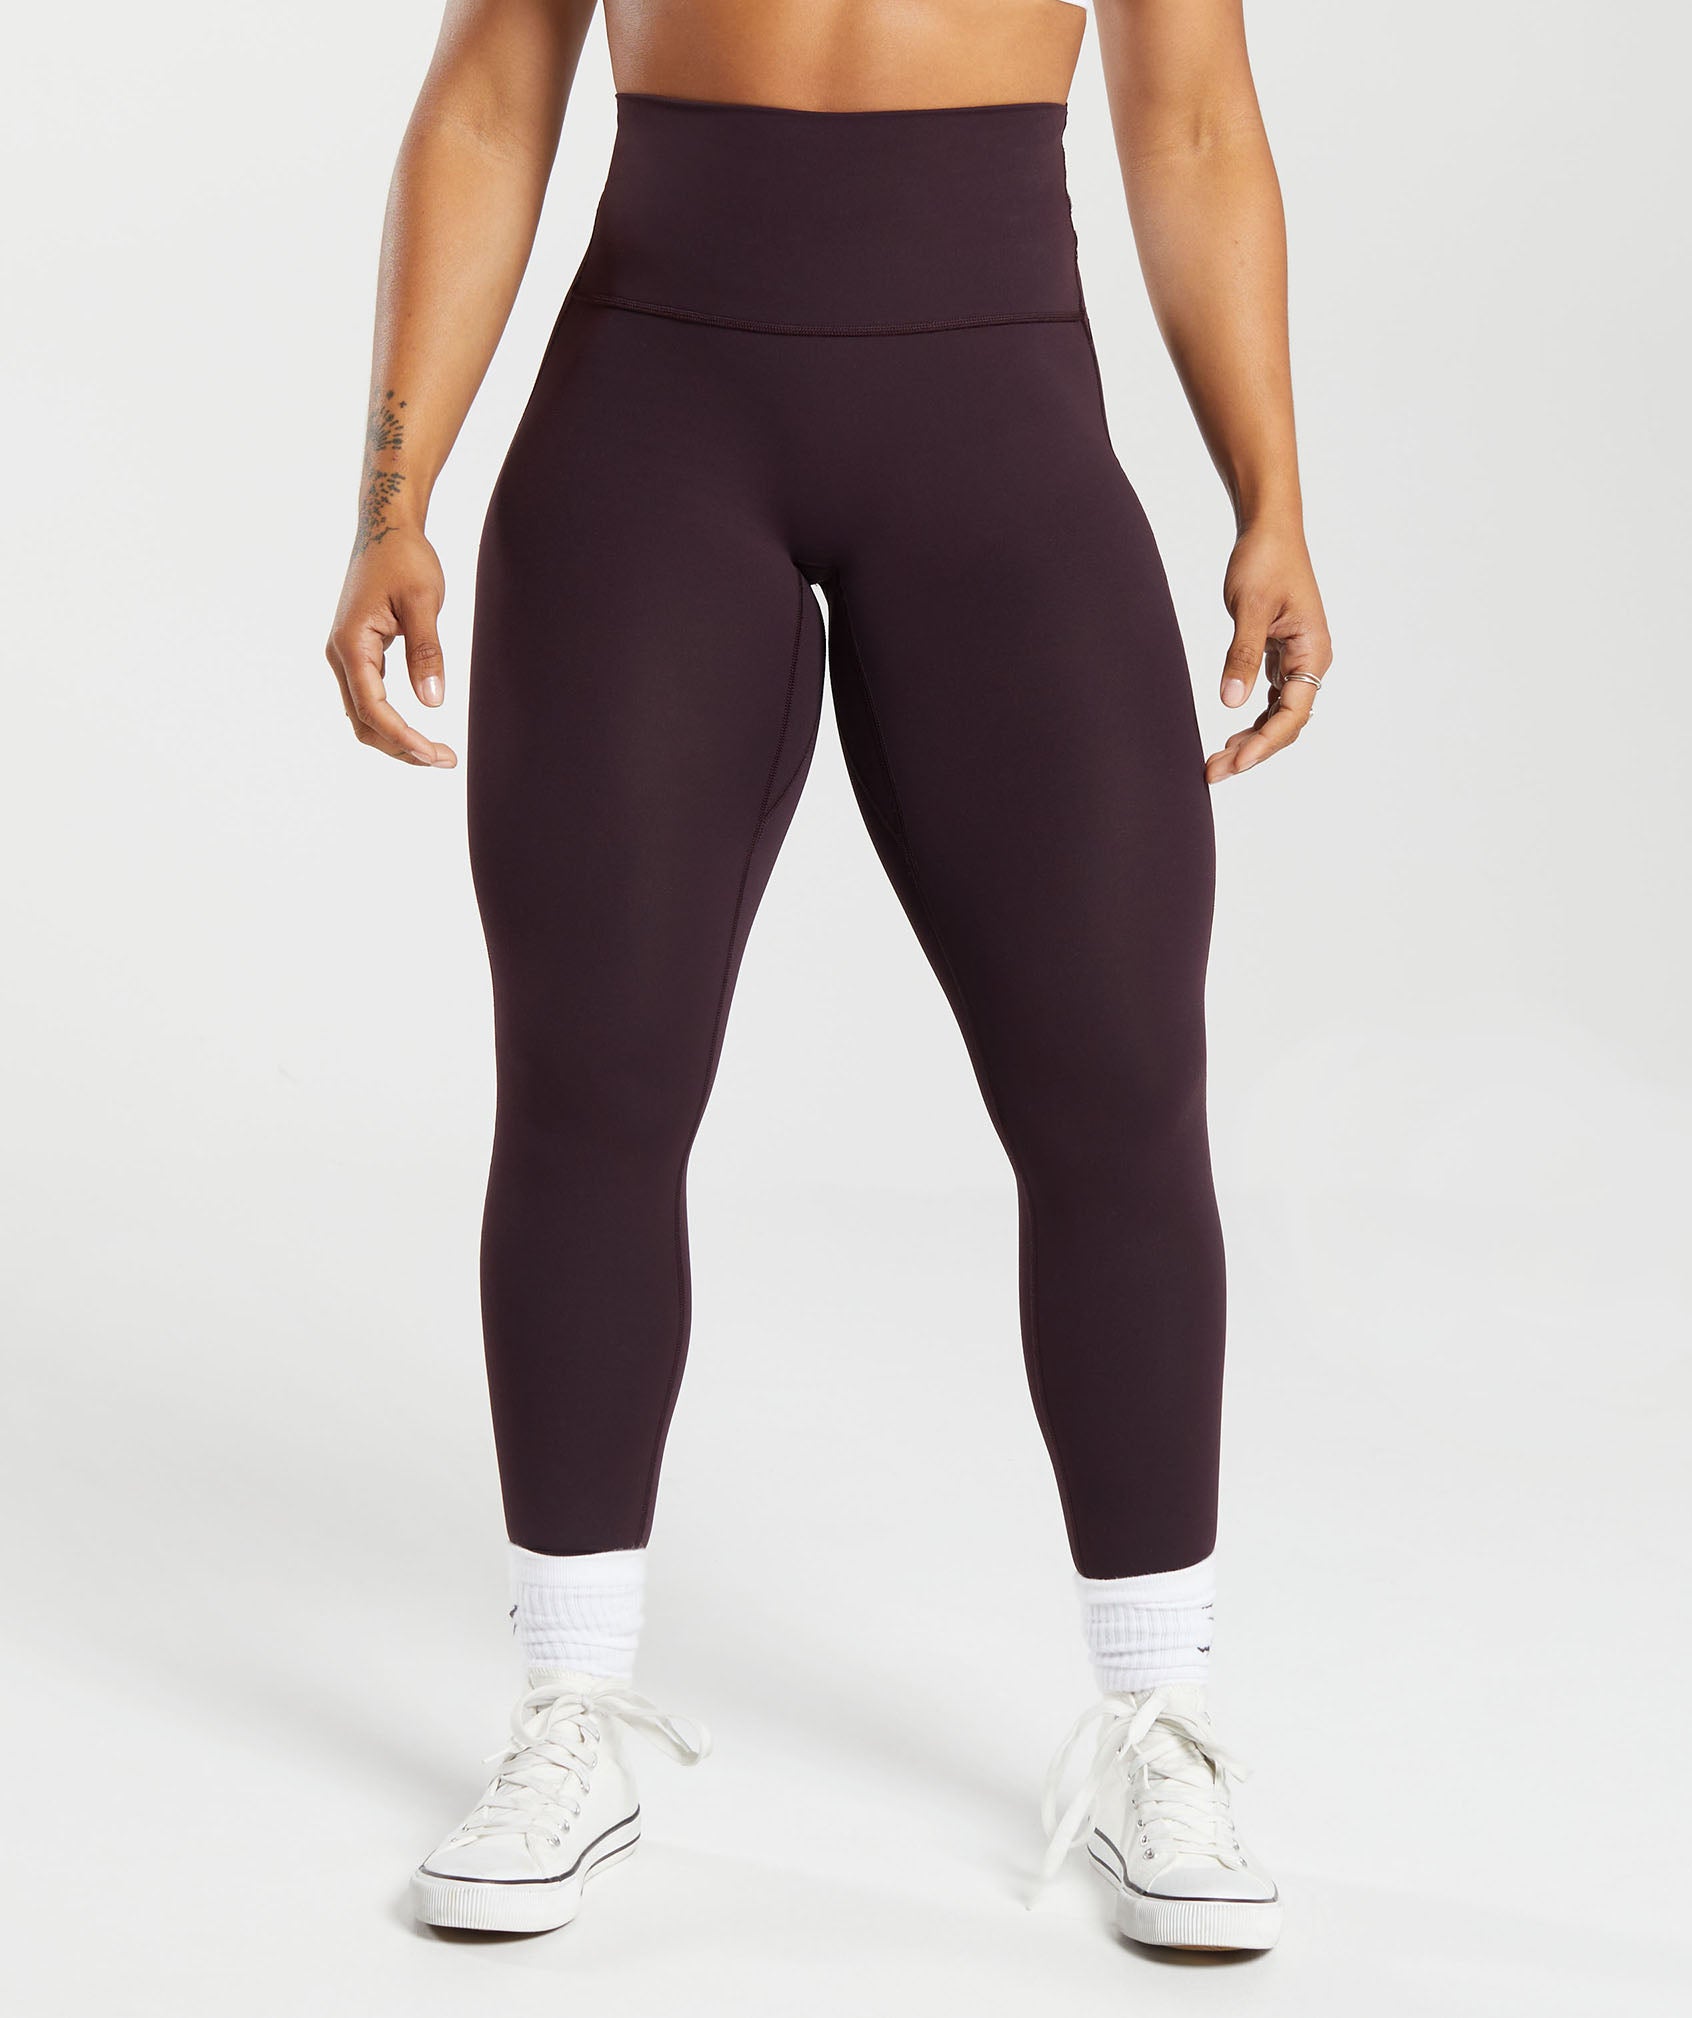 ChromelleisURE Womens Seamless Yoga Scrunch Bum Gym Leggings With Butt Lift  And V Waist For Workout, Gym, And Sports Elastic And Comfortable Sportswear  Style #230822 From Jiu09, $10.92